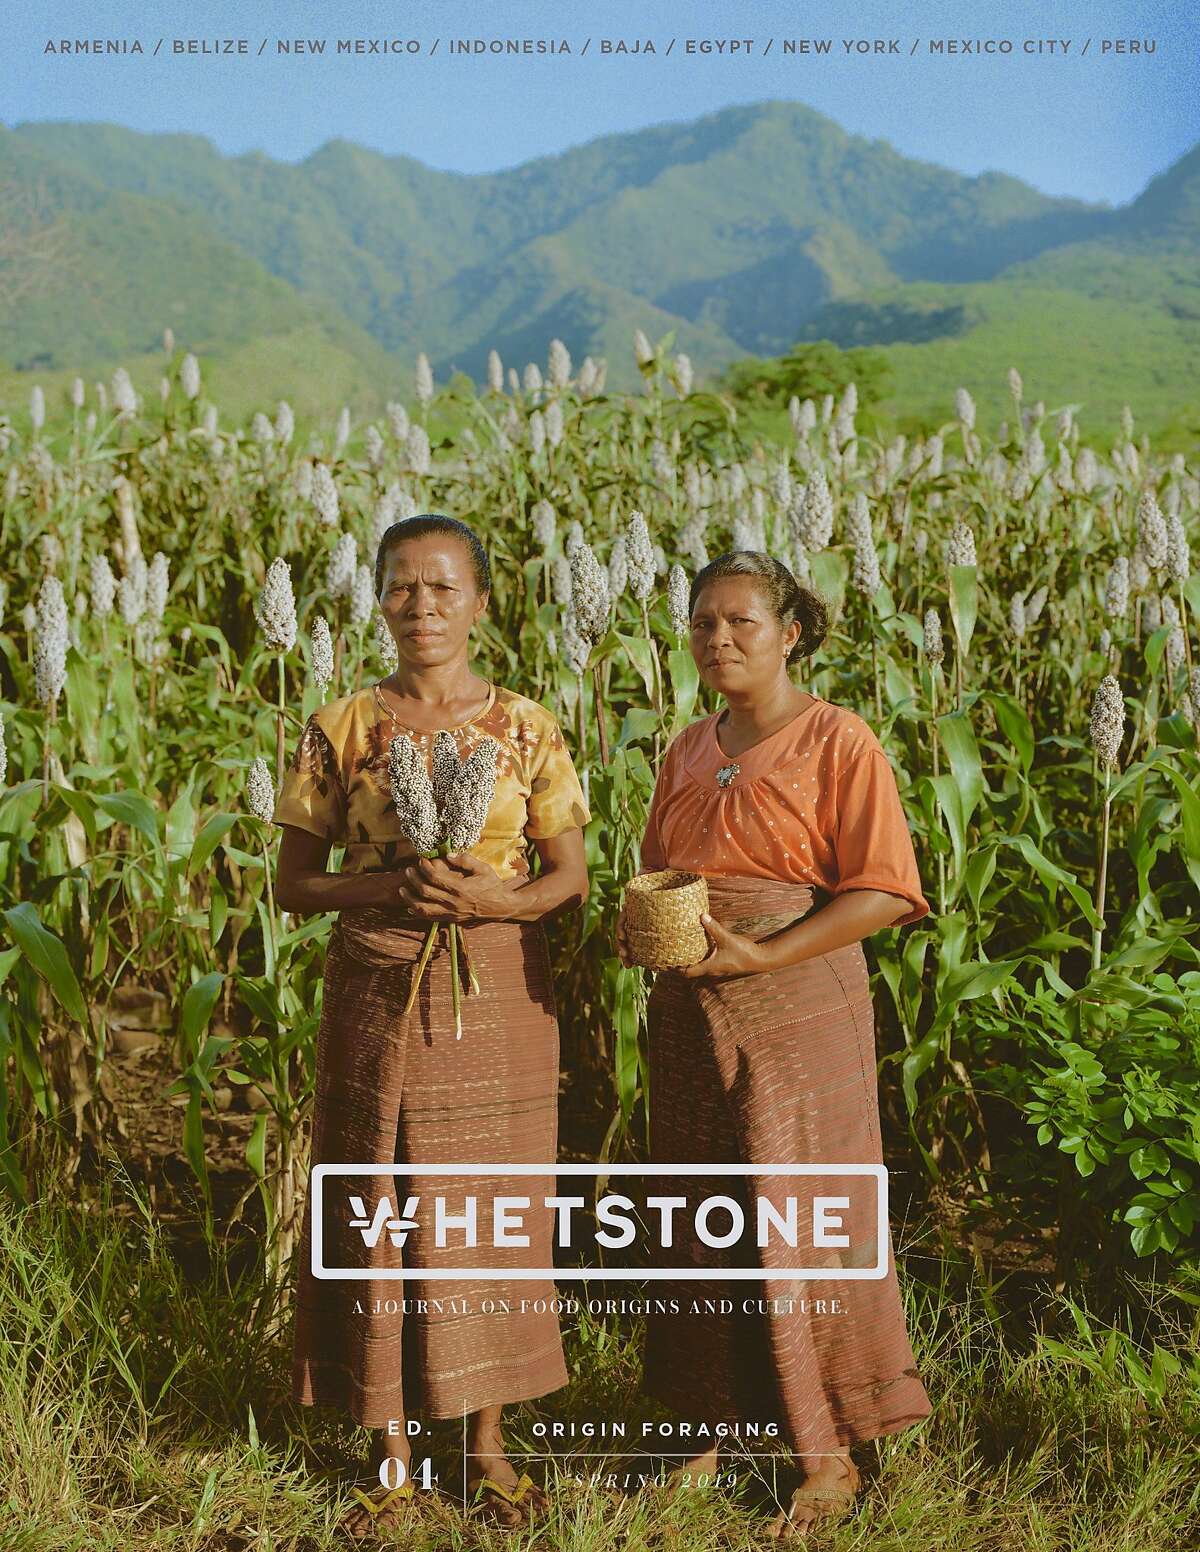 The spring 2019 issue of Whetstone magazine, which is published by Whetstone Media, a Bay Area multimedia company run by founder Stephen Satterfield and Melissa Shi.